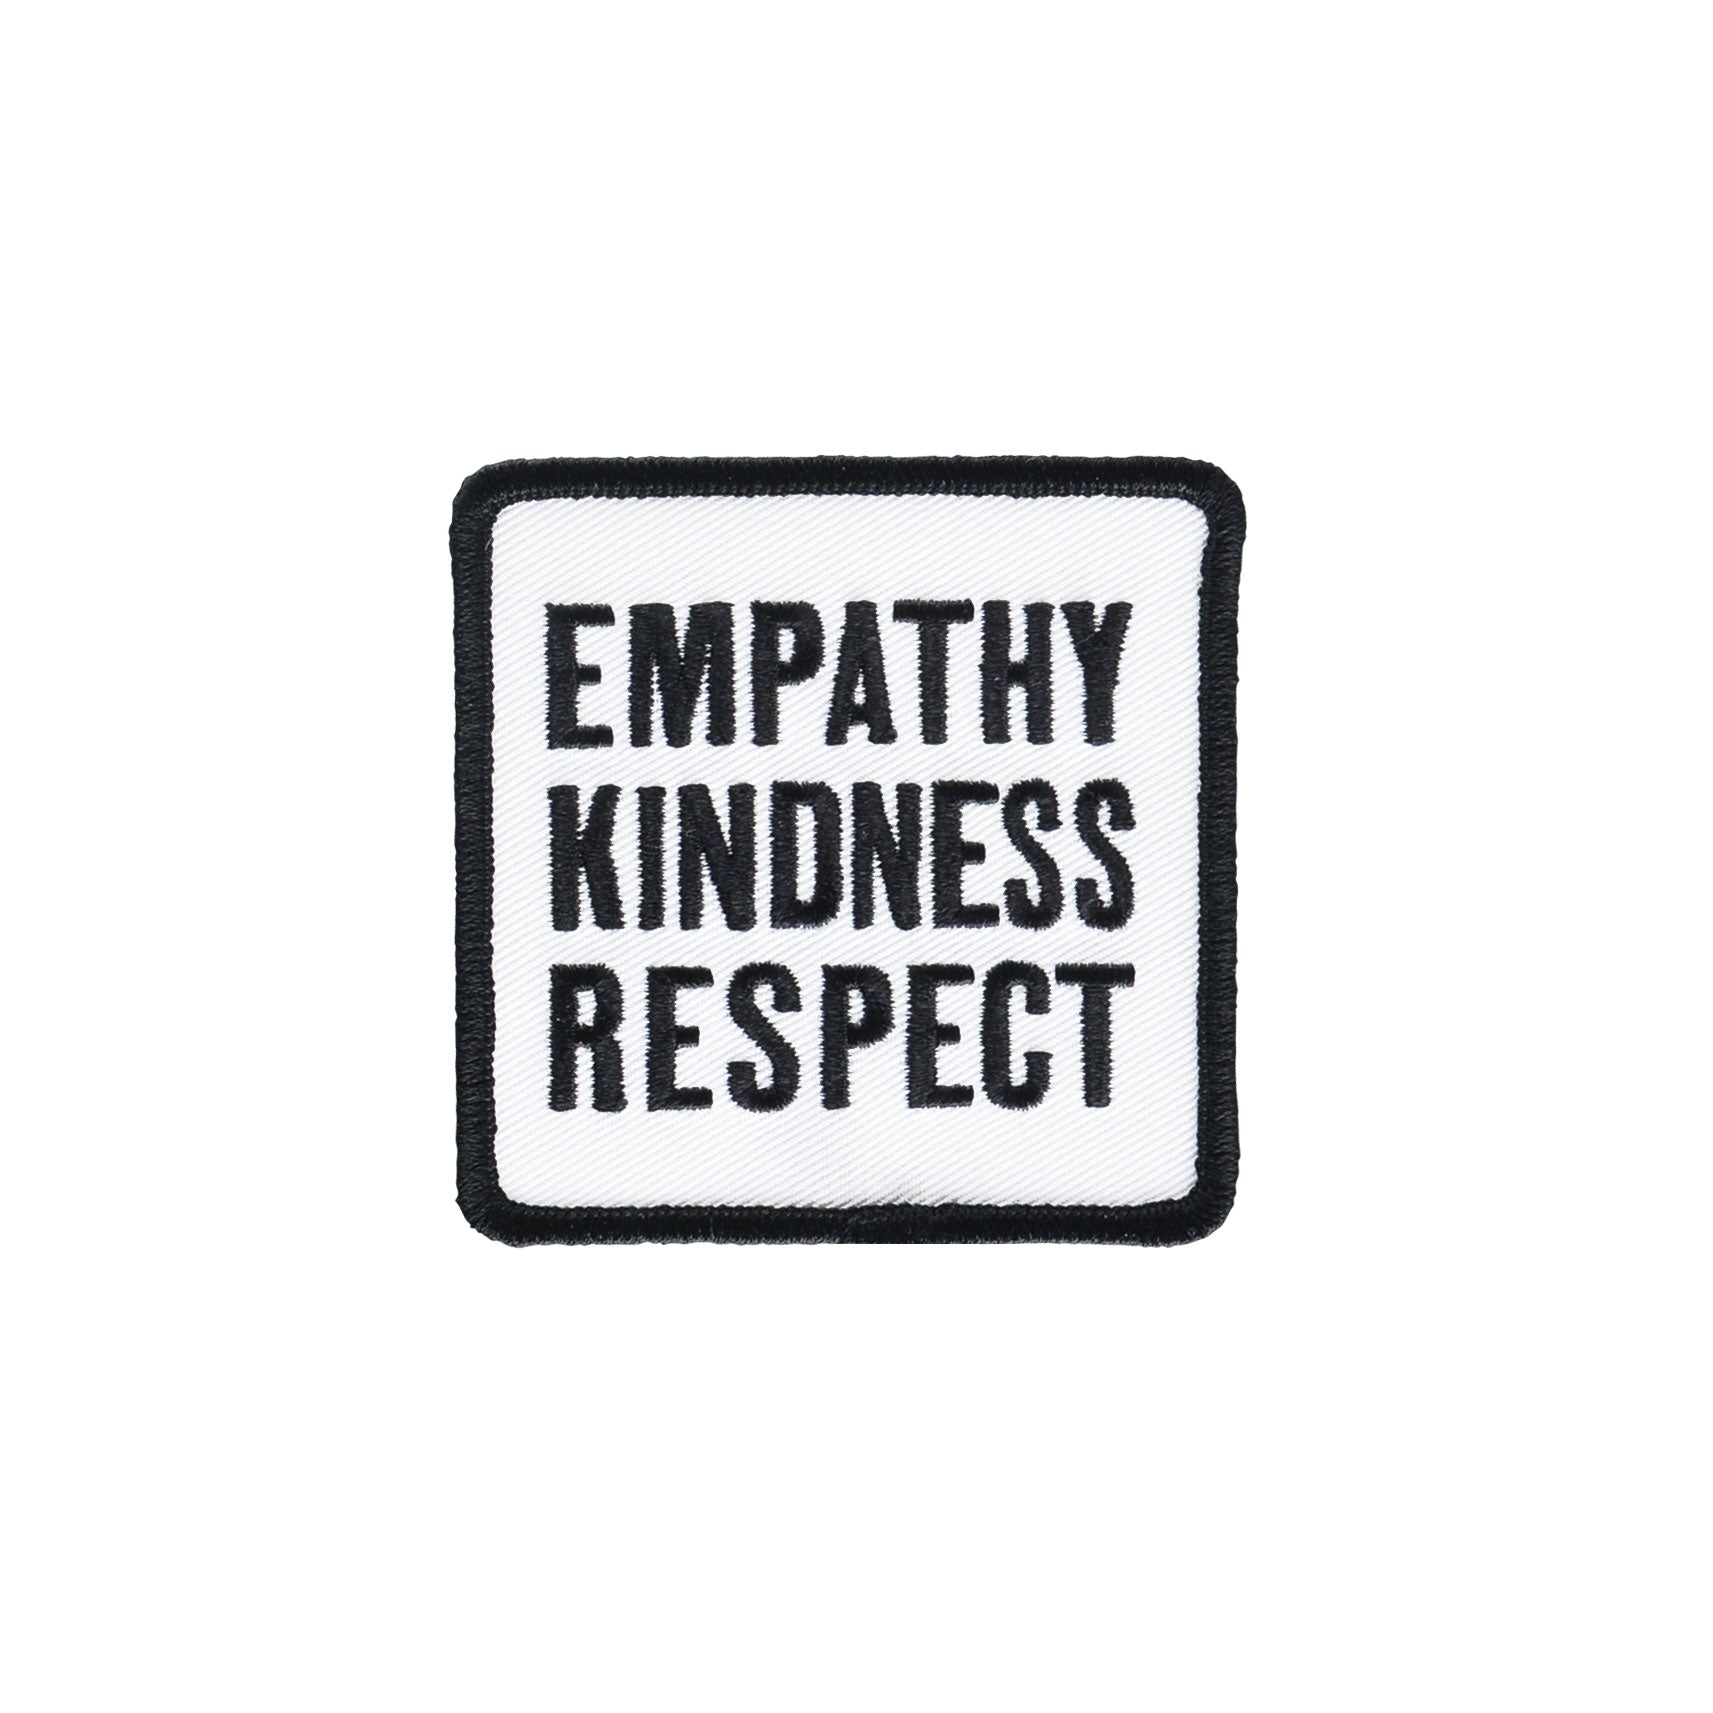 Constellation & Co. Empathy Kindness Respect Patch 